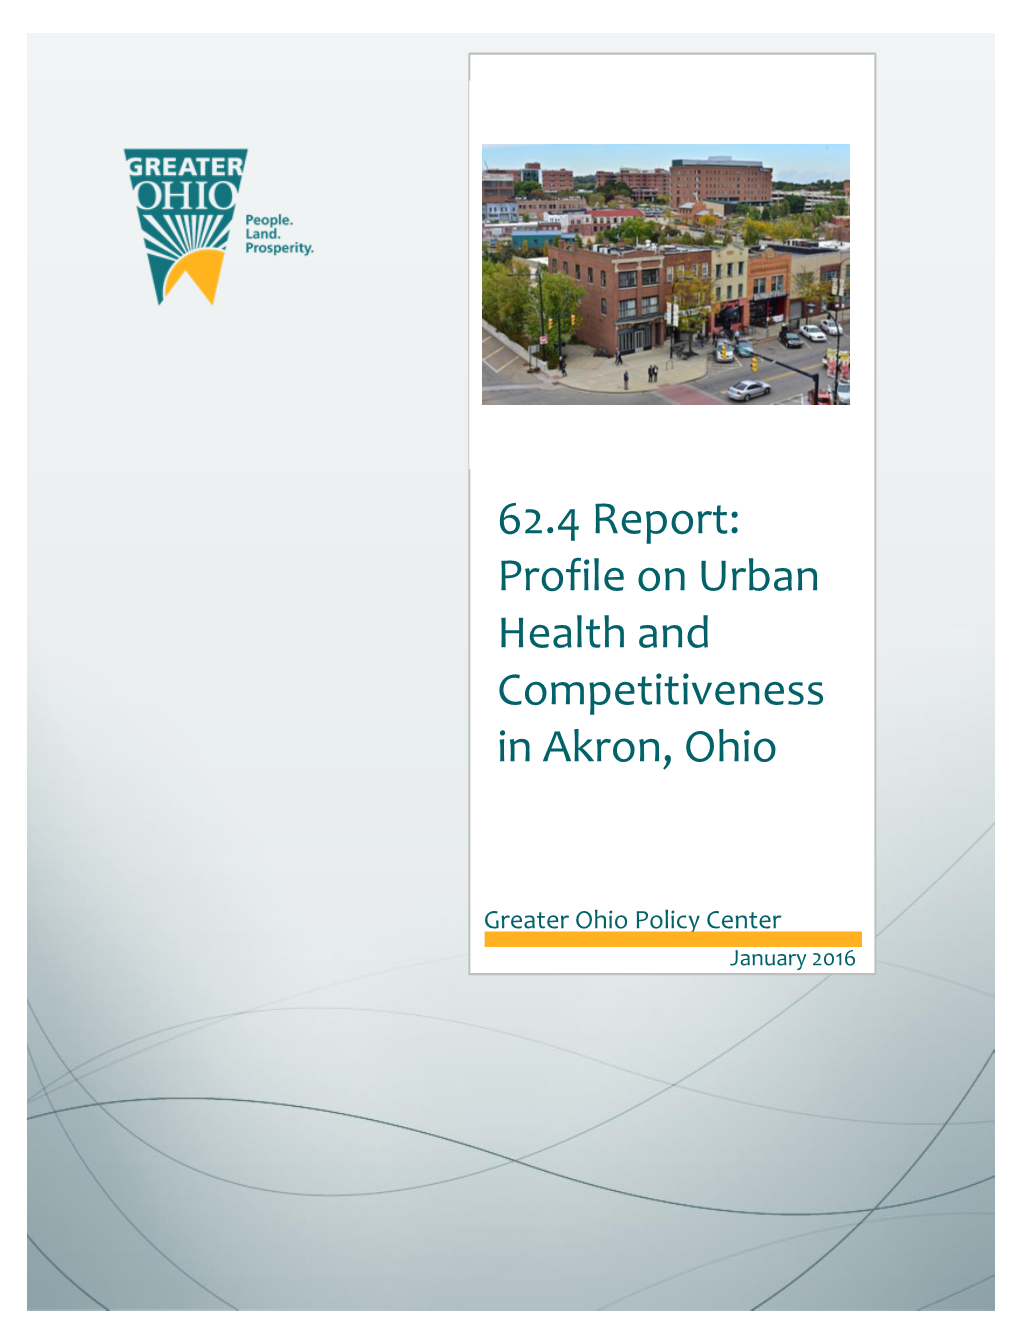 62.4 Report: Profile on Urban Health and Competitiveness in Akron, Ohio